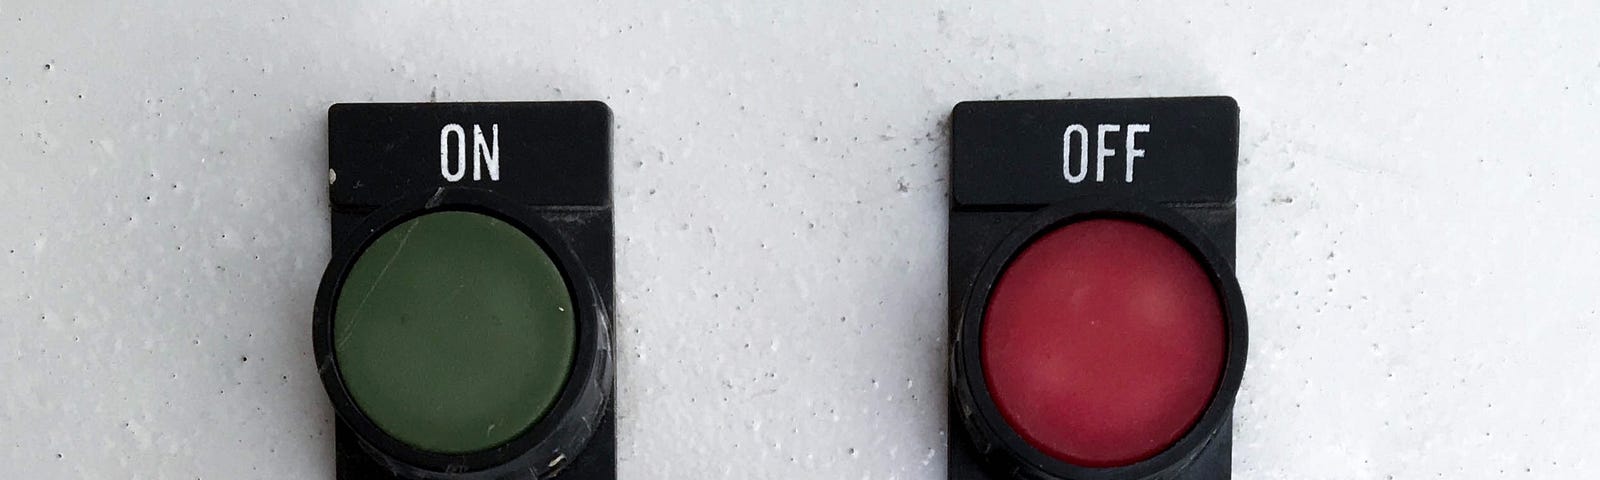 A dark green button marked ‘ON’ and a dark red button marked ‘OFF’ on a white wall. The ‘OFF’ button is pressed.